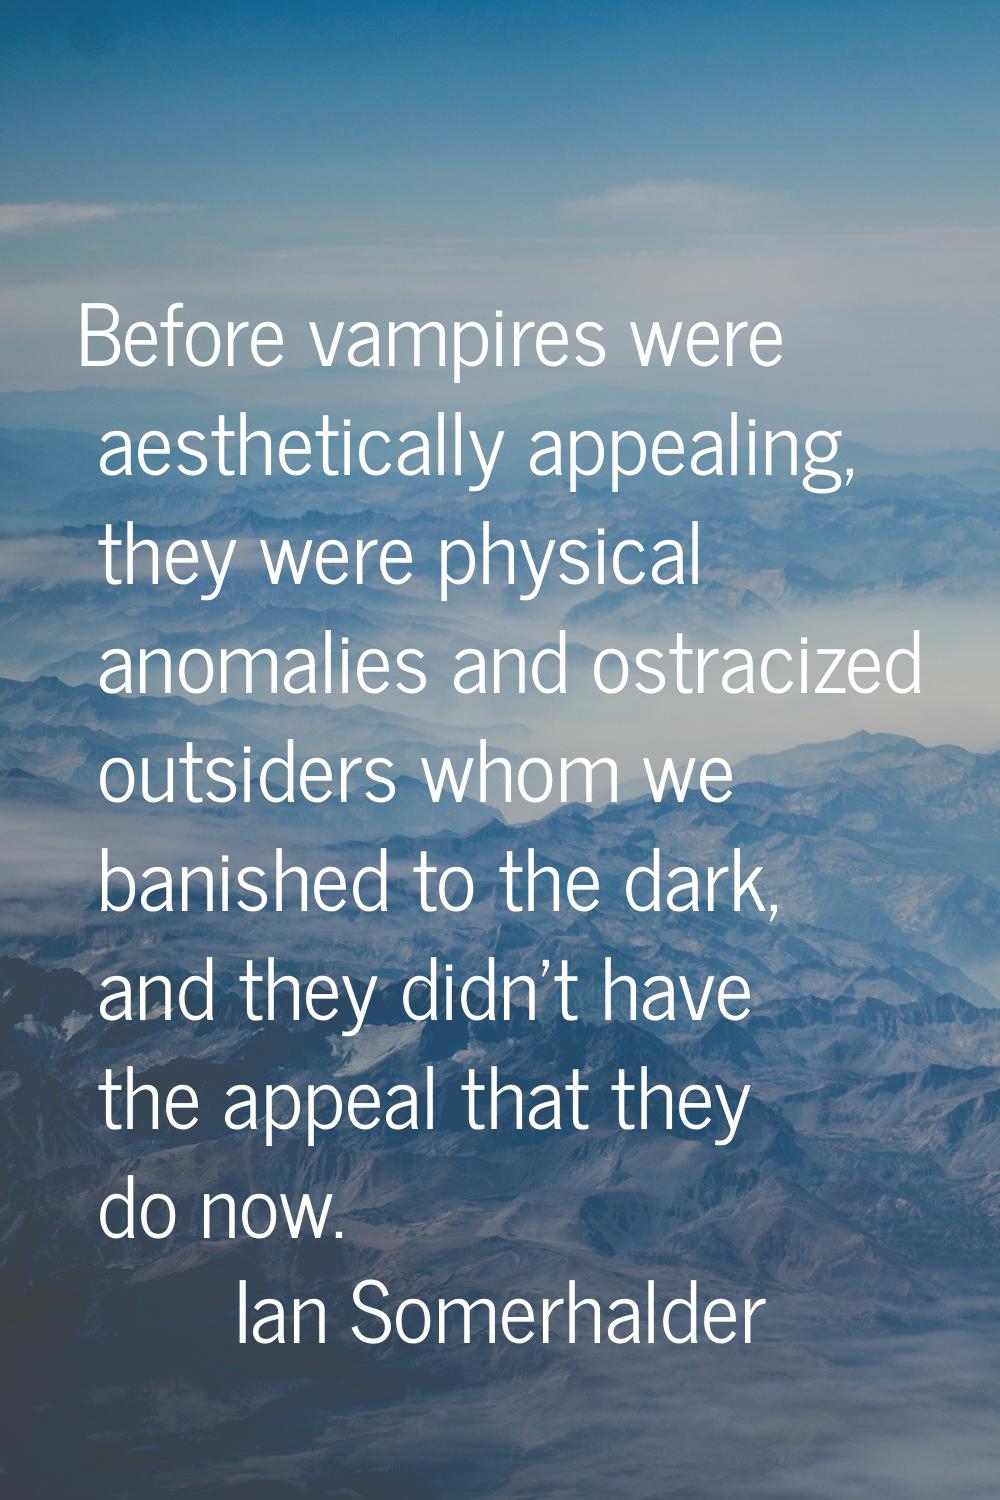 Before vampires were aesthetically appealing, they were physical anomalies and ostracized outsiders